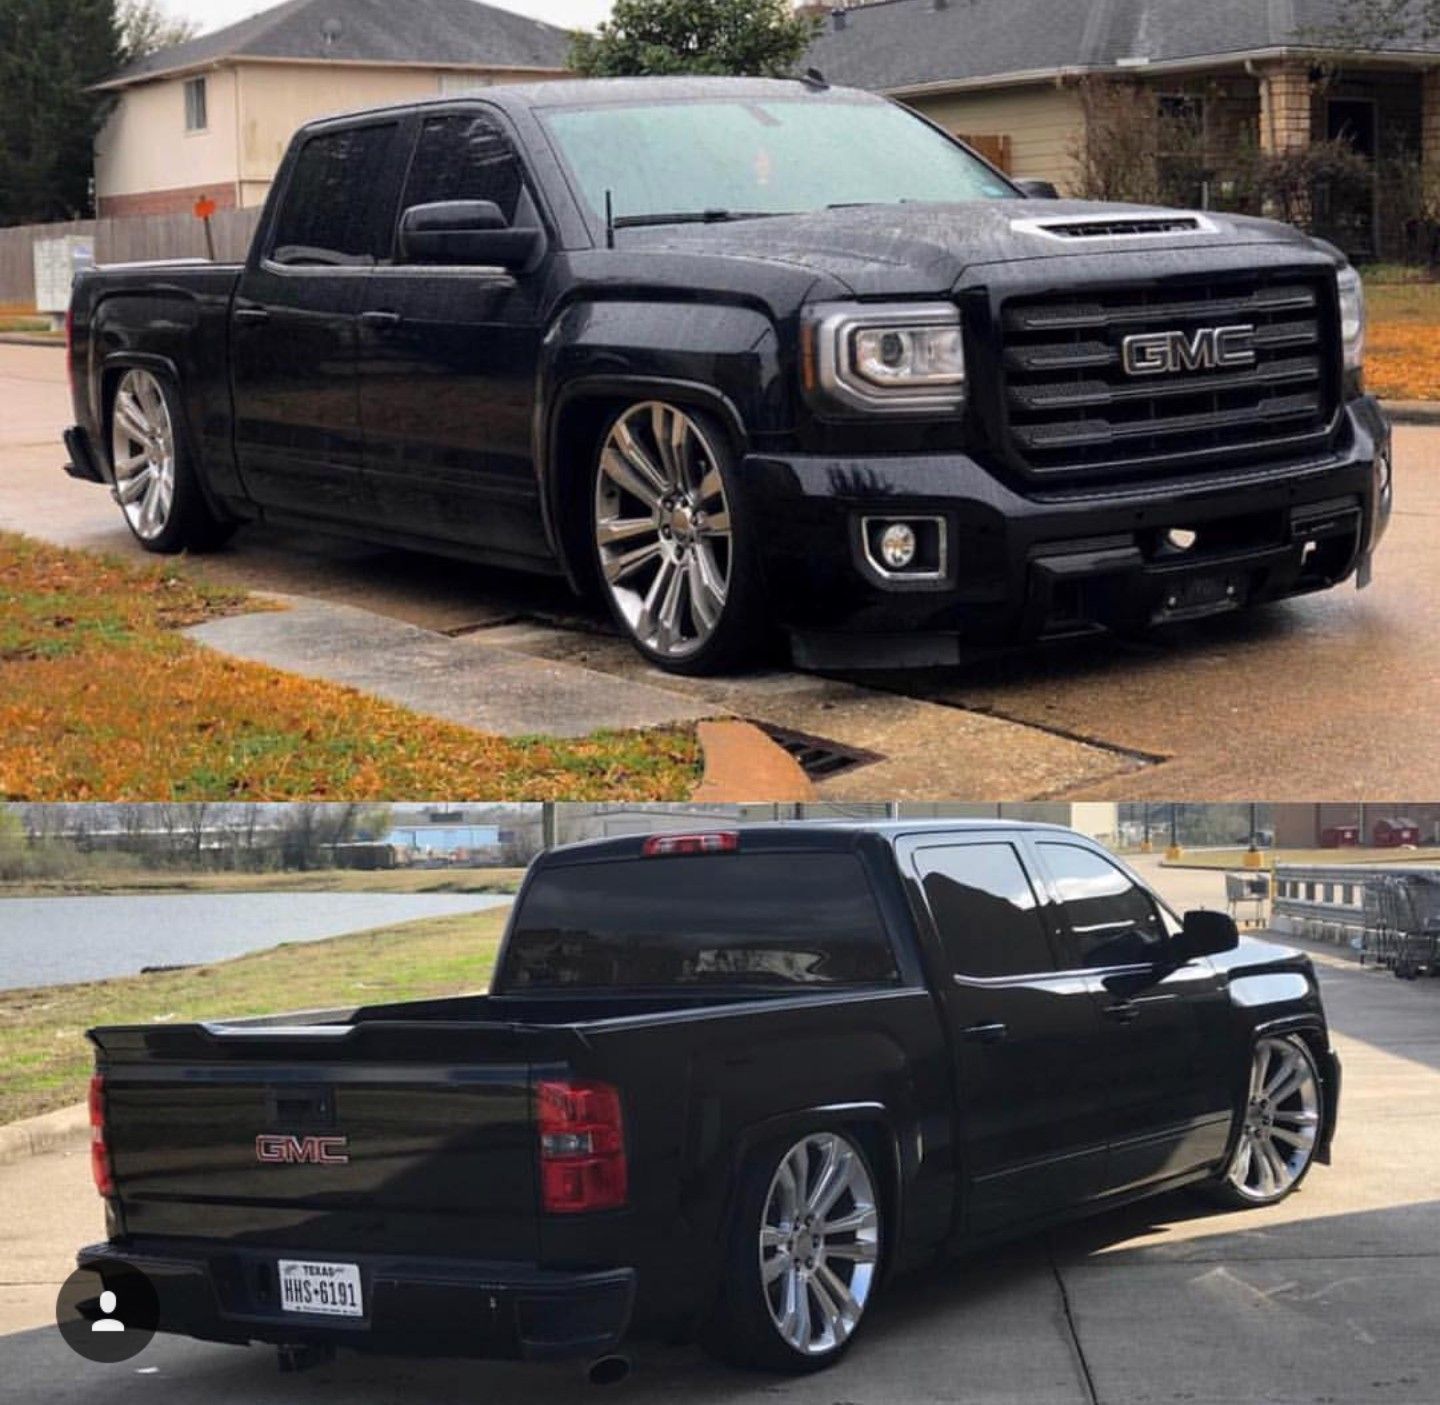 Lowered truck stance